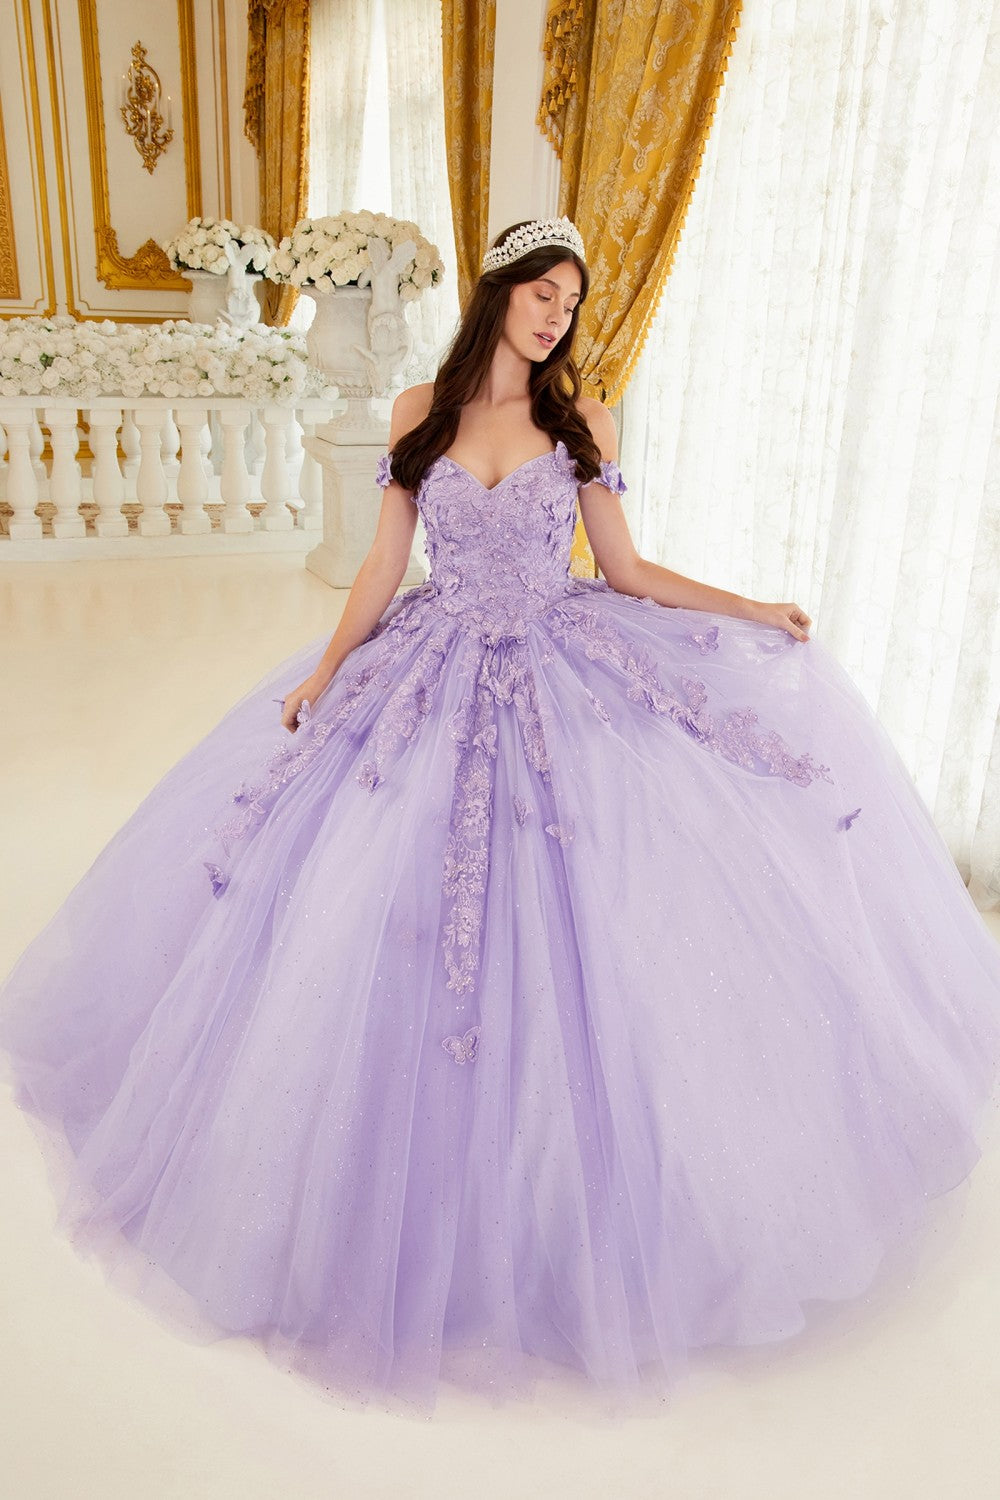 Layered Tulle Ball Gown With Lace Applique By Cinderella Divine -15709